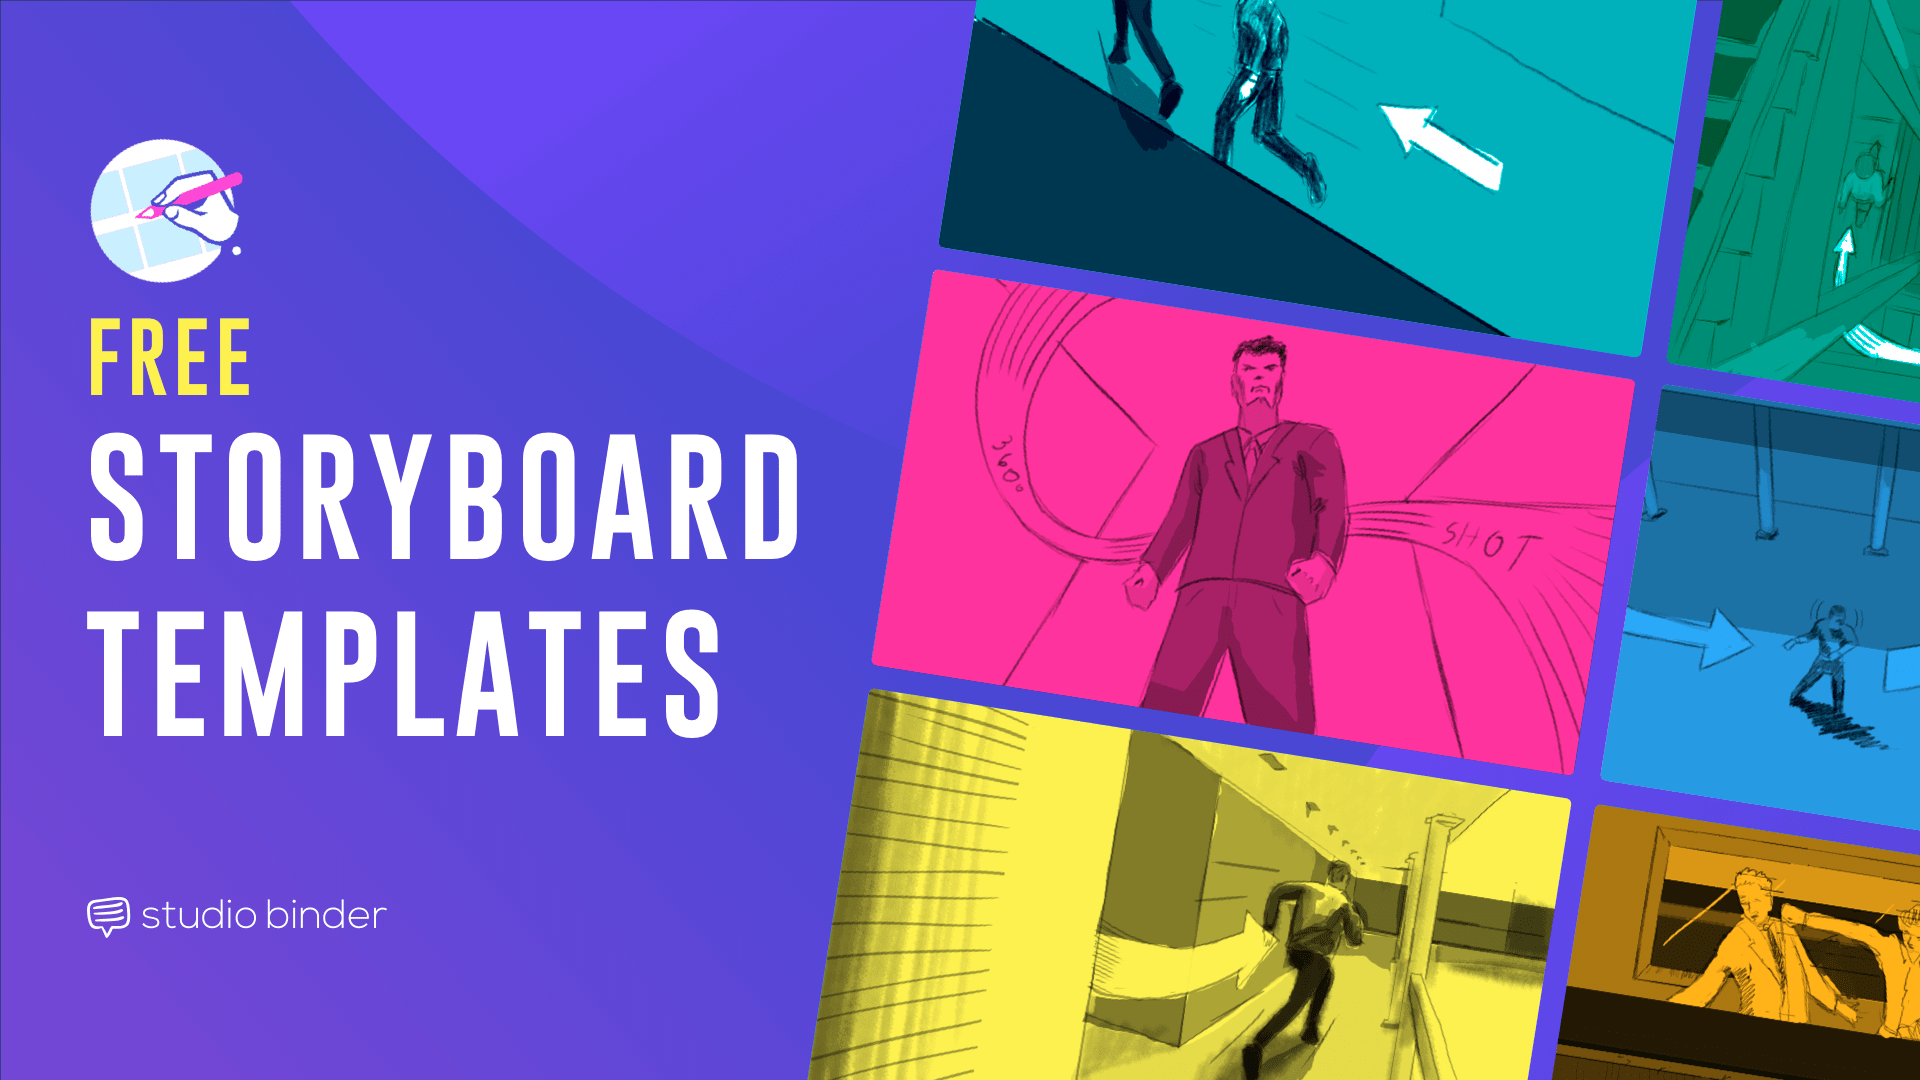 Download FREE PowerPoint Storyboard Templates (2019)